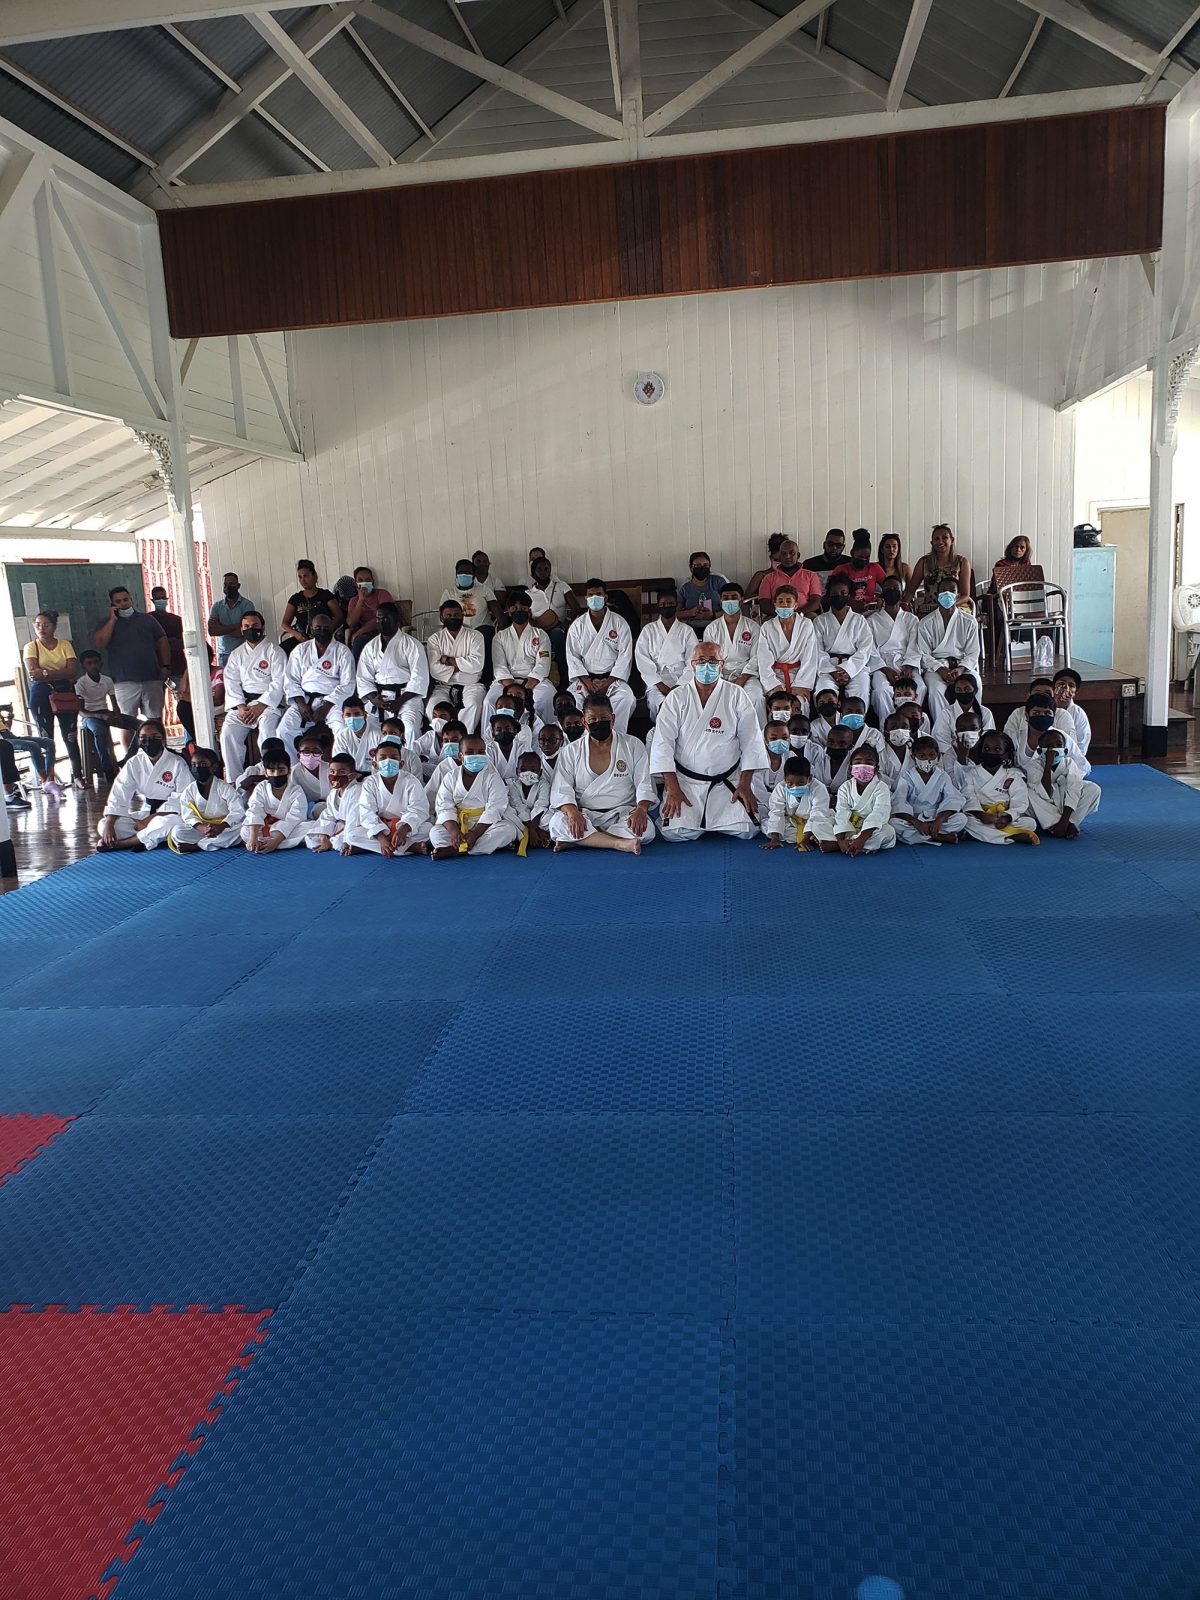 Participants at the Association do Shotokan Karate
 examination session pose for a photo opportunity